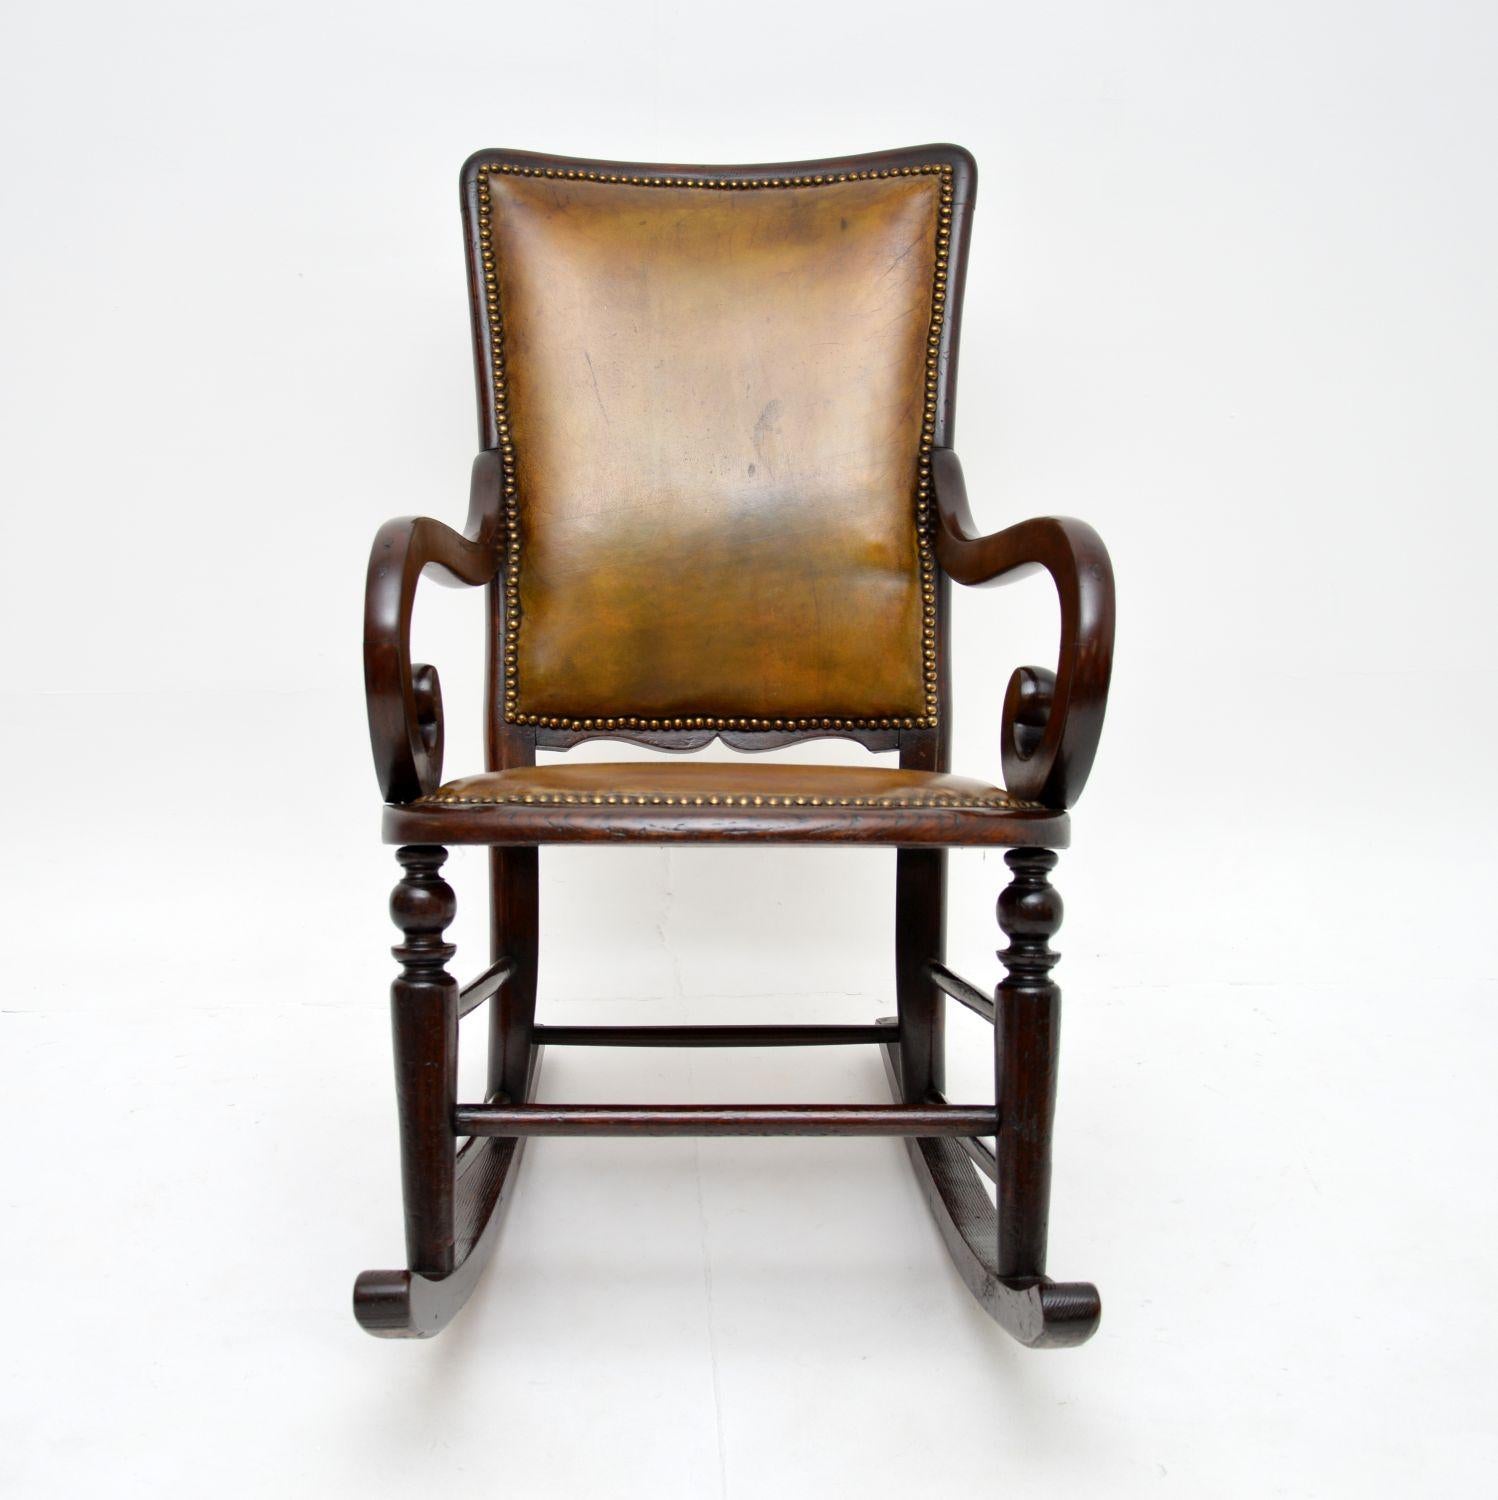 A charming antique Victorian period rocking chair. This was made in England, it dates from around the 1860-1880’s.

It is of superb quality, it is quite petite yet very comfortable to relax in. The frame has nicely turned legs and stretcher, with